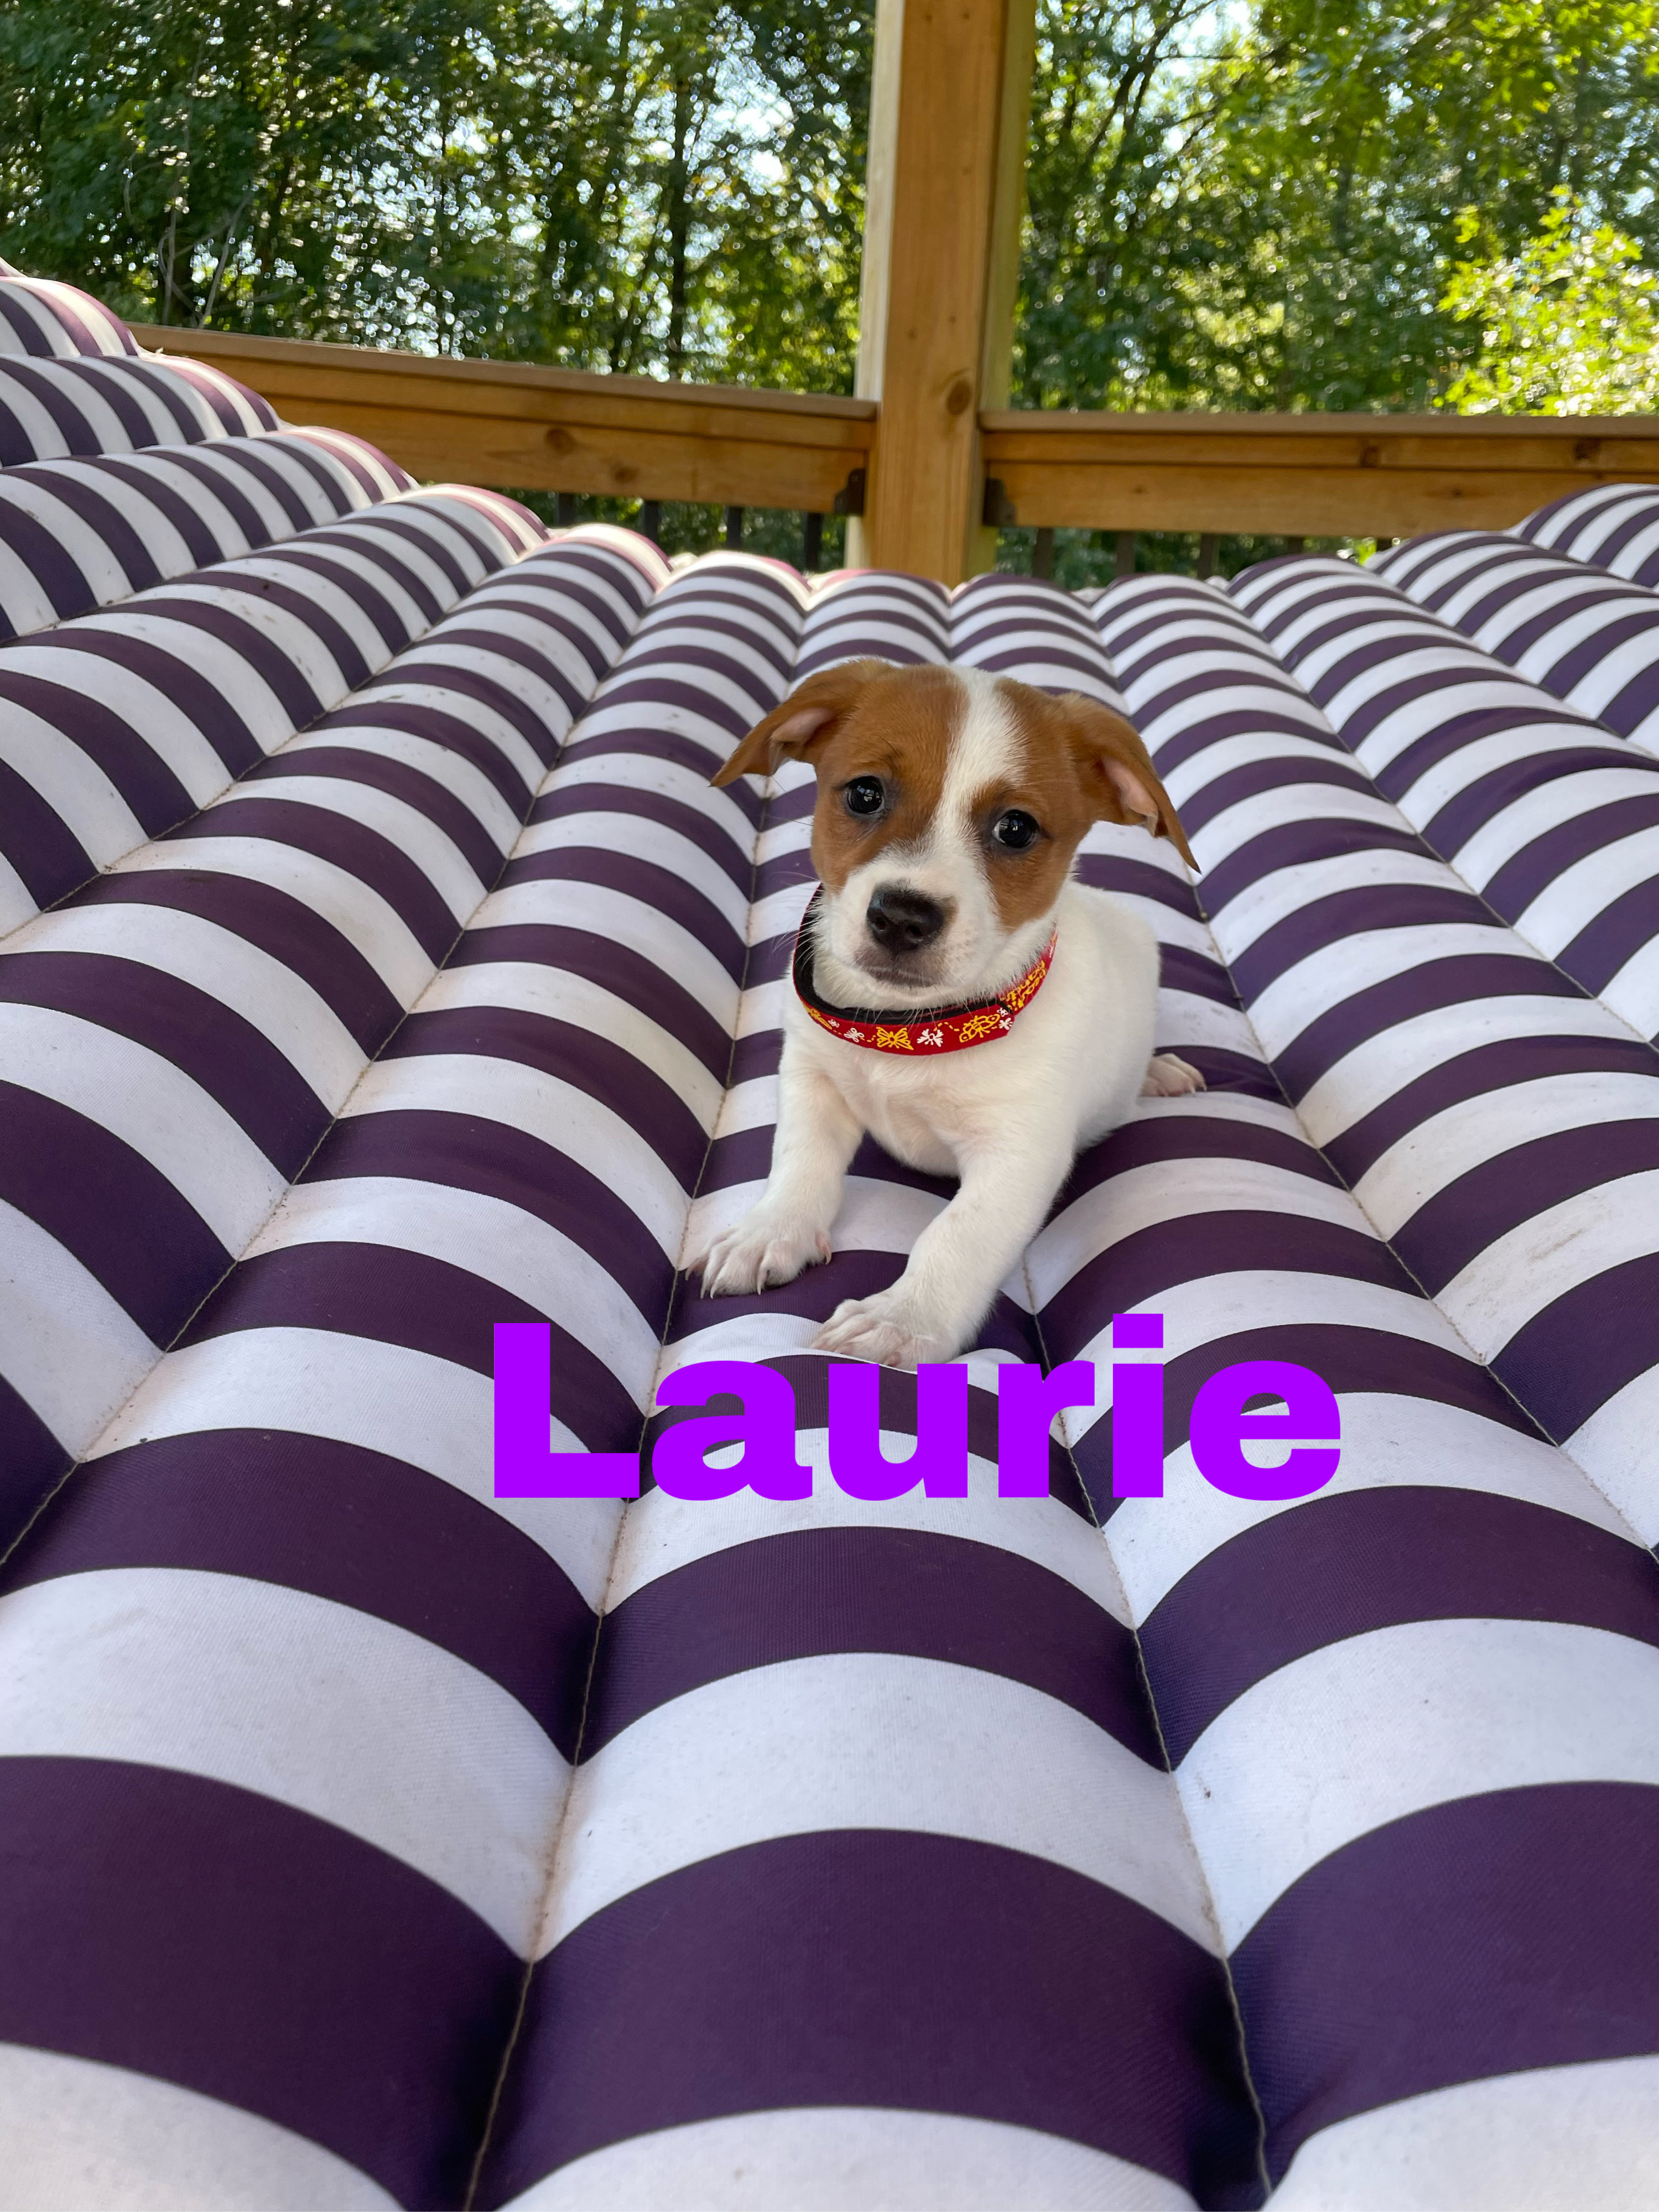 Laurie Event Saturday 1 4 Premier Pet Supply 13 Mile Southfield Rd detail page